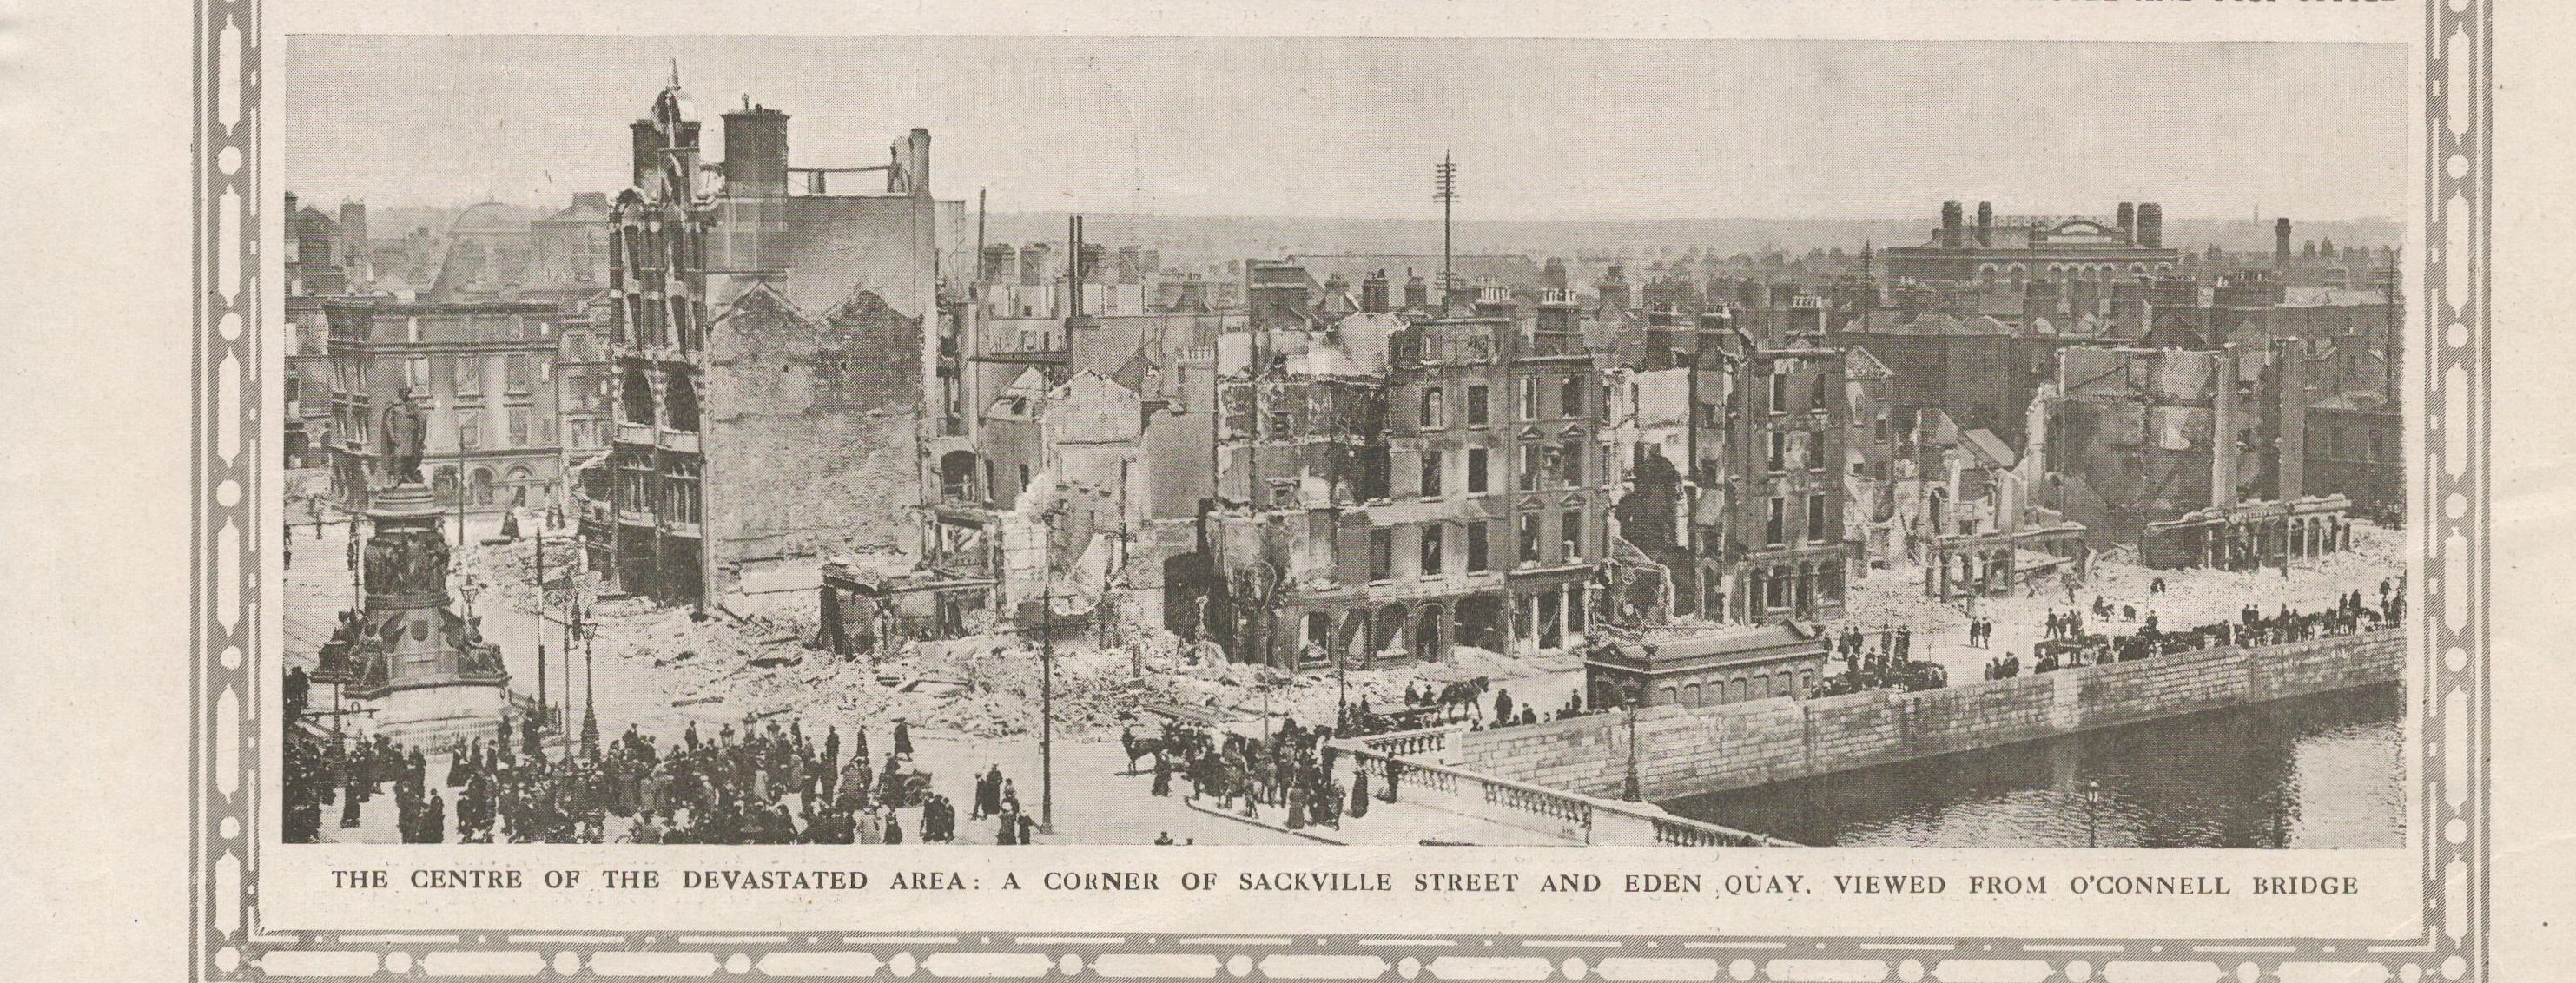 Original 1916 Page The Easter Rising Dublin In Ruins - Image 4 of 4